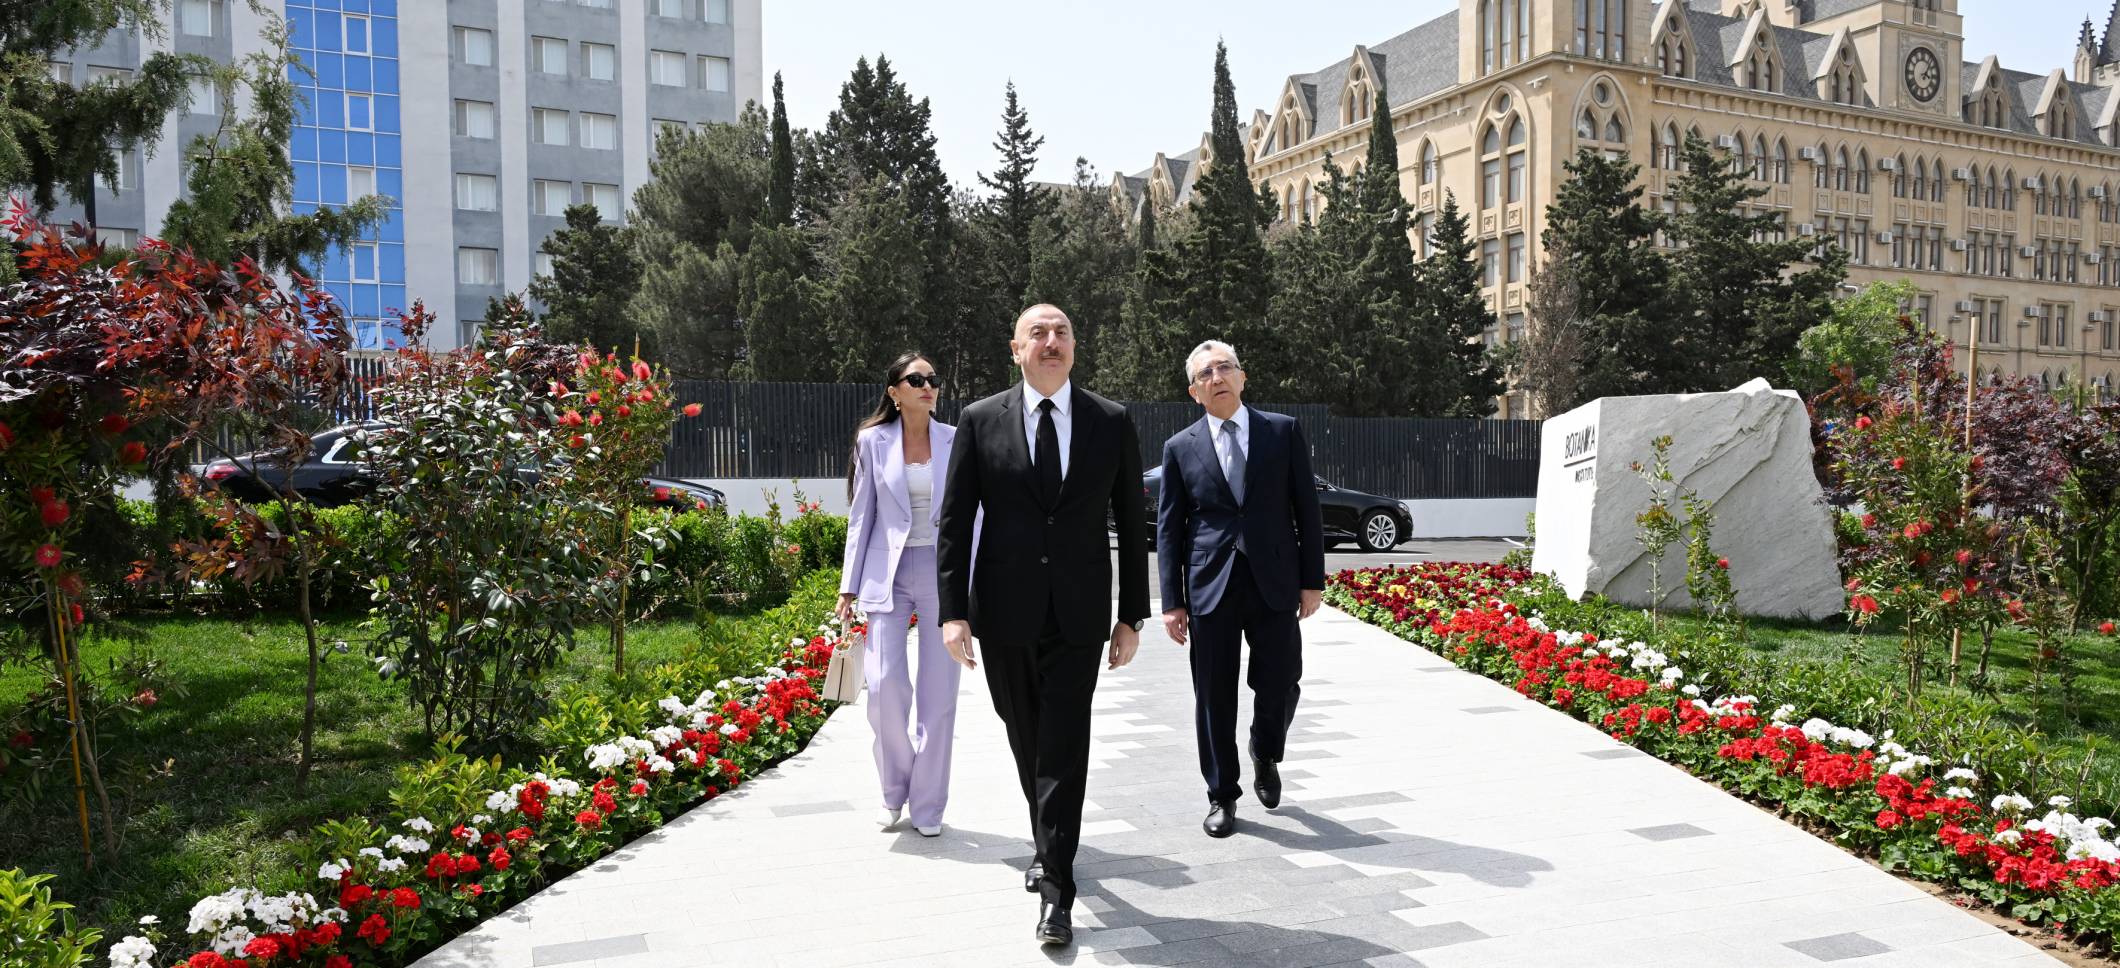 Ilham Aliyev and First Lady Mehriban Aliyeva participated in opening of the new building of Institute of Botany in Baku and reviewed the developments at the Botanical Garden